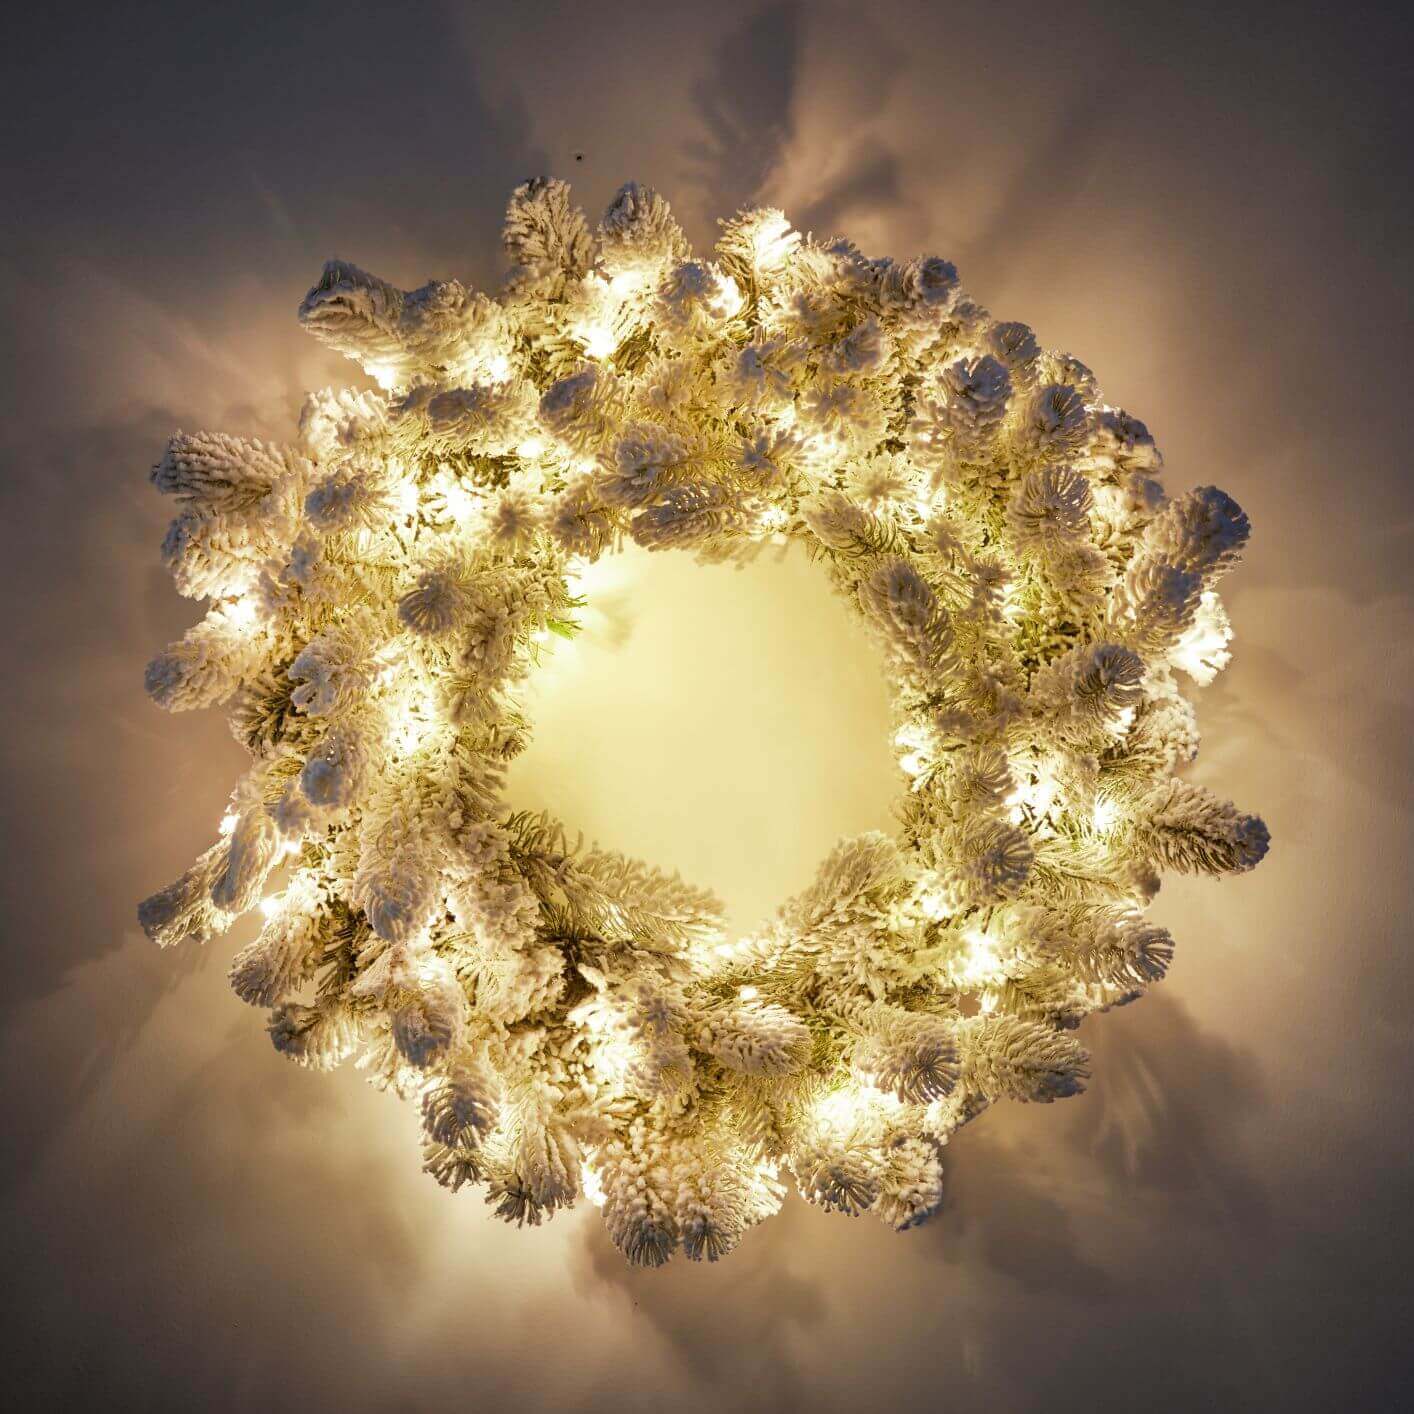 King of Christmas 24" King Flock® Wreath with Warm White LED Lights (Battery Operated)